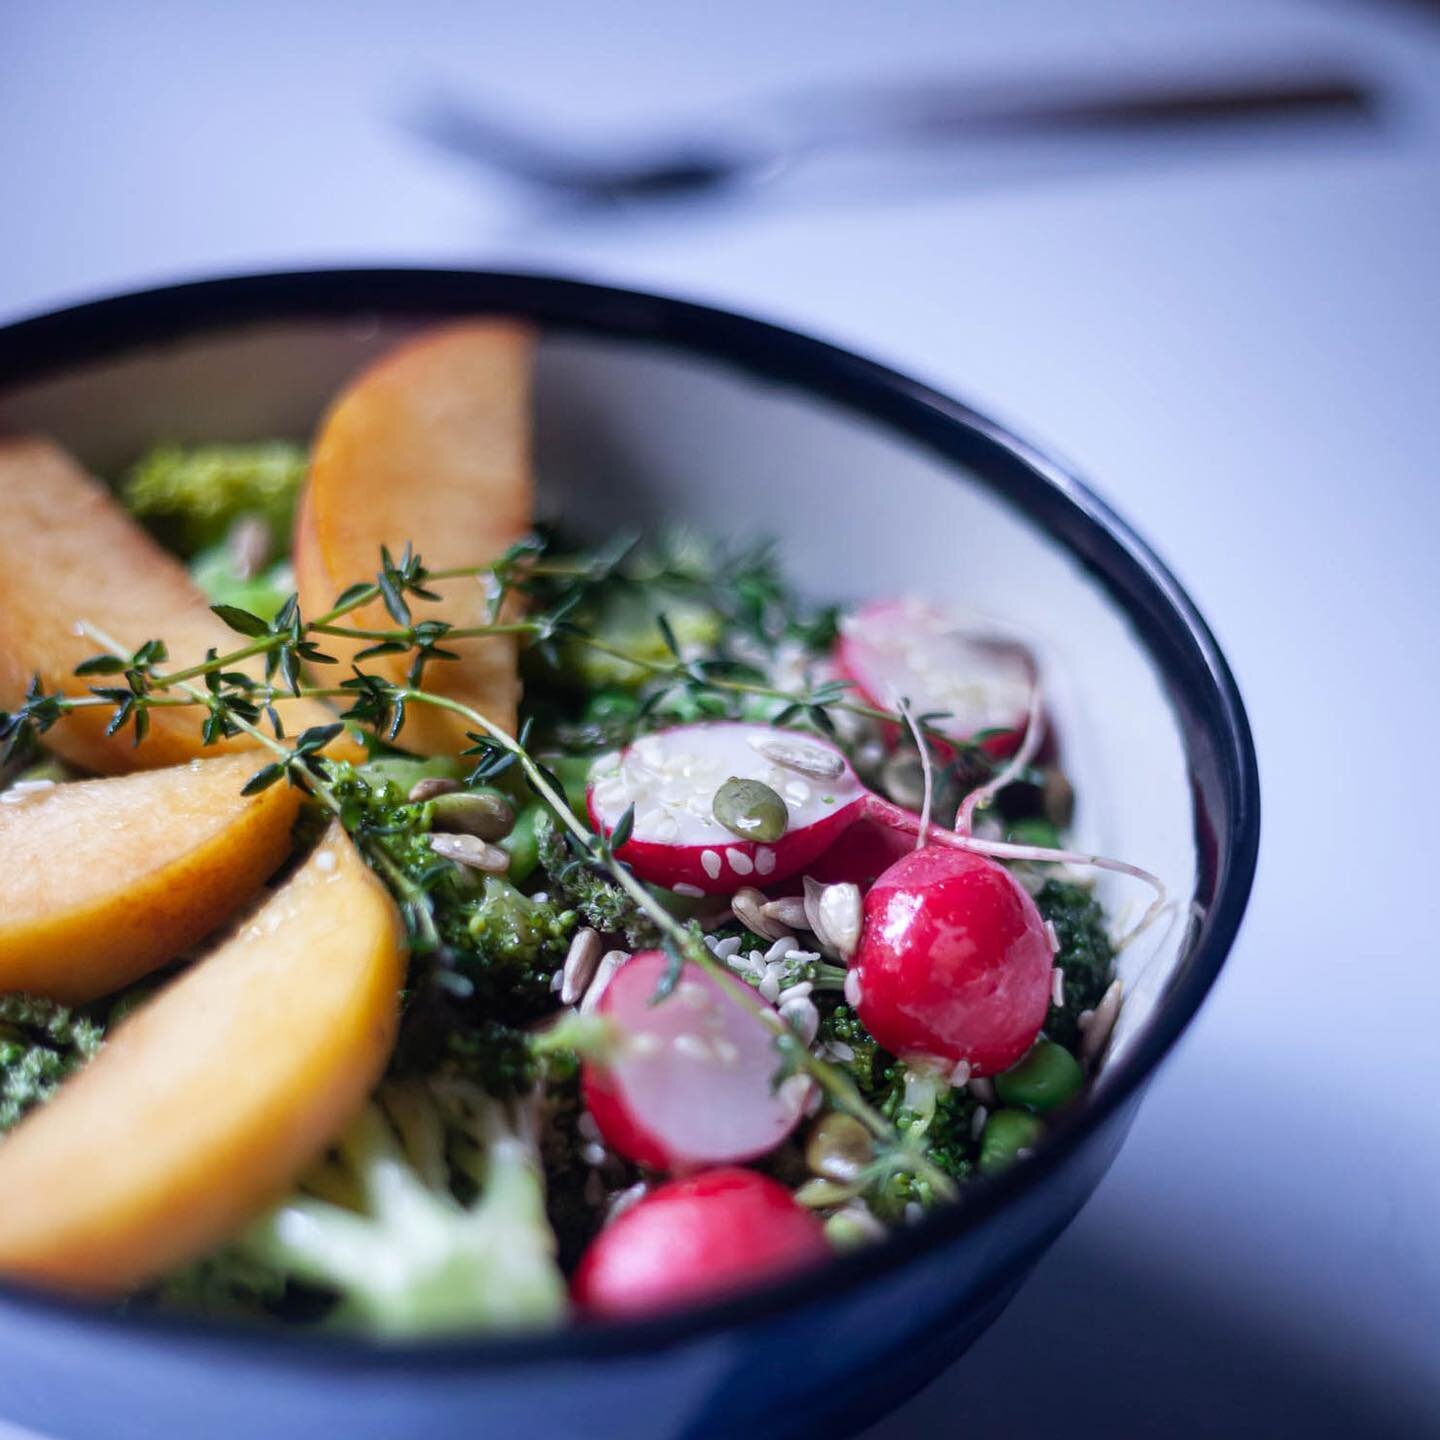 | BE WELL | COOK | Colorful Summer Bowl &mdash; What is Summer without enjoying a colorful and wholesome bowl of fresh vegetables and sweet fruits?  This sumptuous bowl consists of nutrient-dense broccoli, green peas, red baby radishes and juicy yell